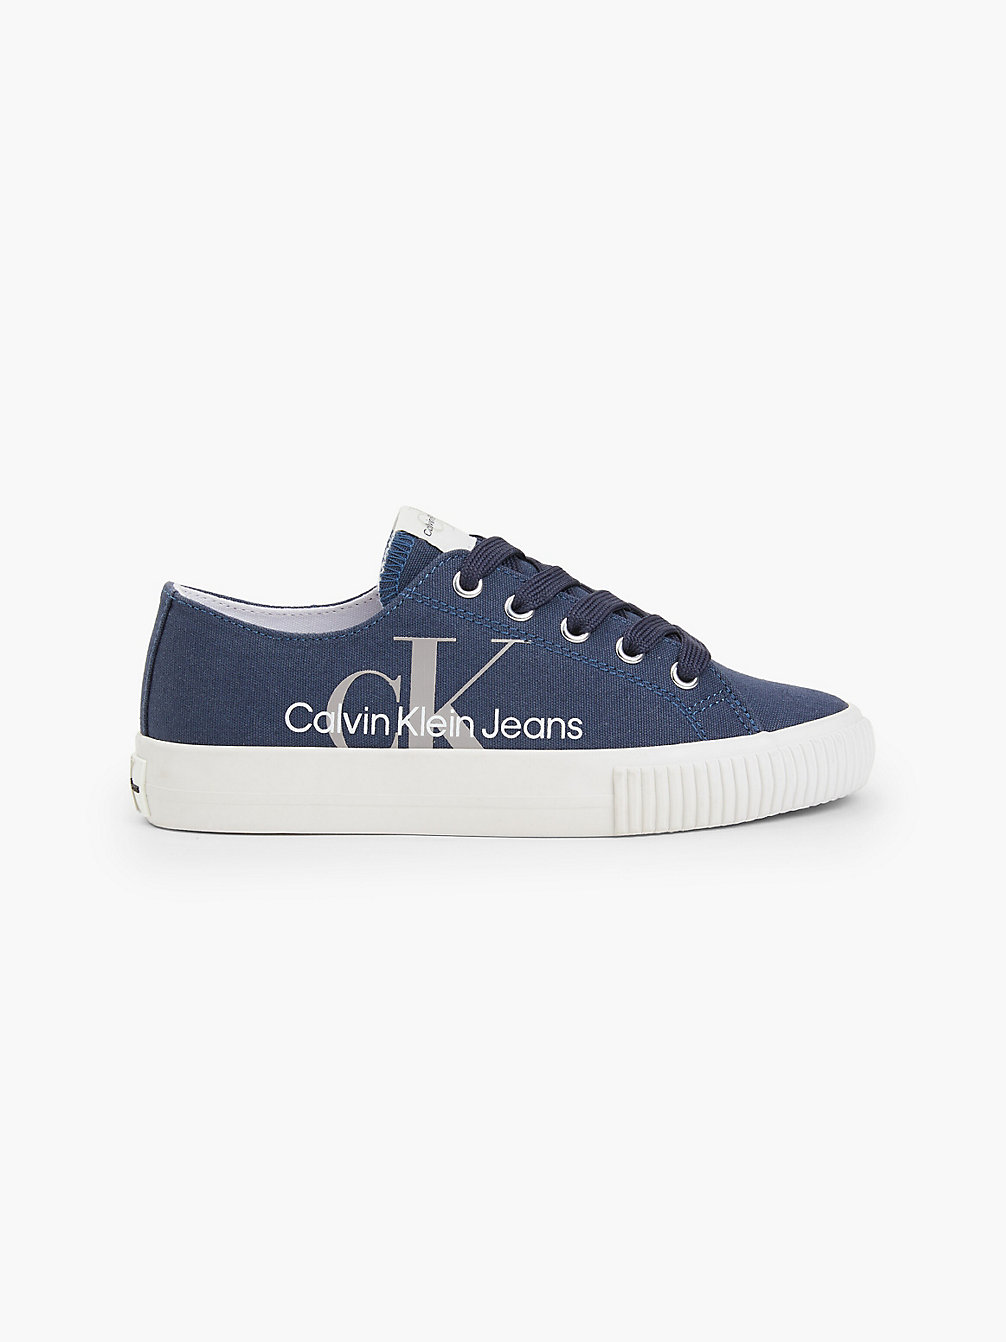 BLUE Recycled Canvas Trainers undefined kids unisex Calvin Klein